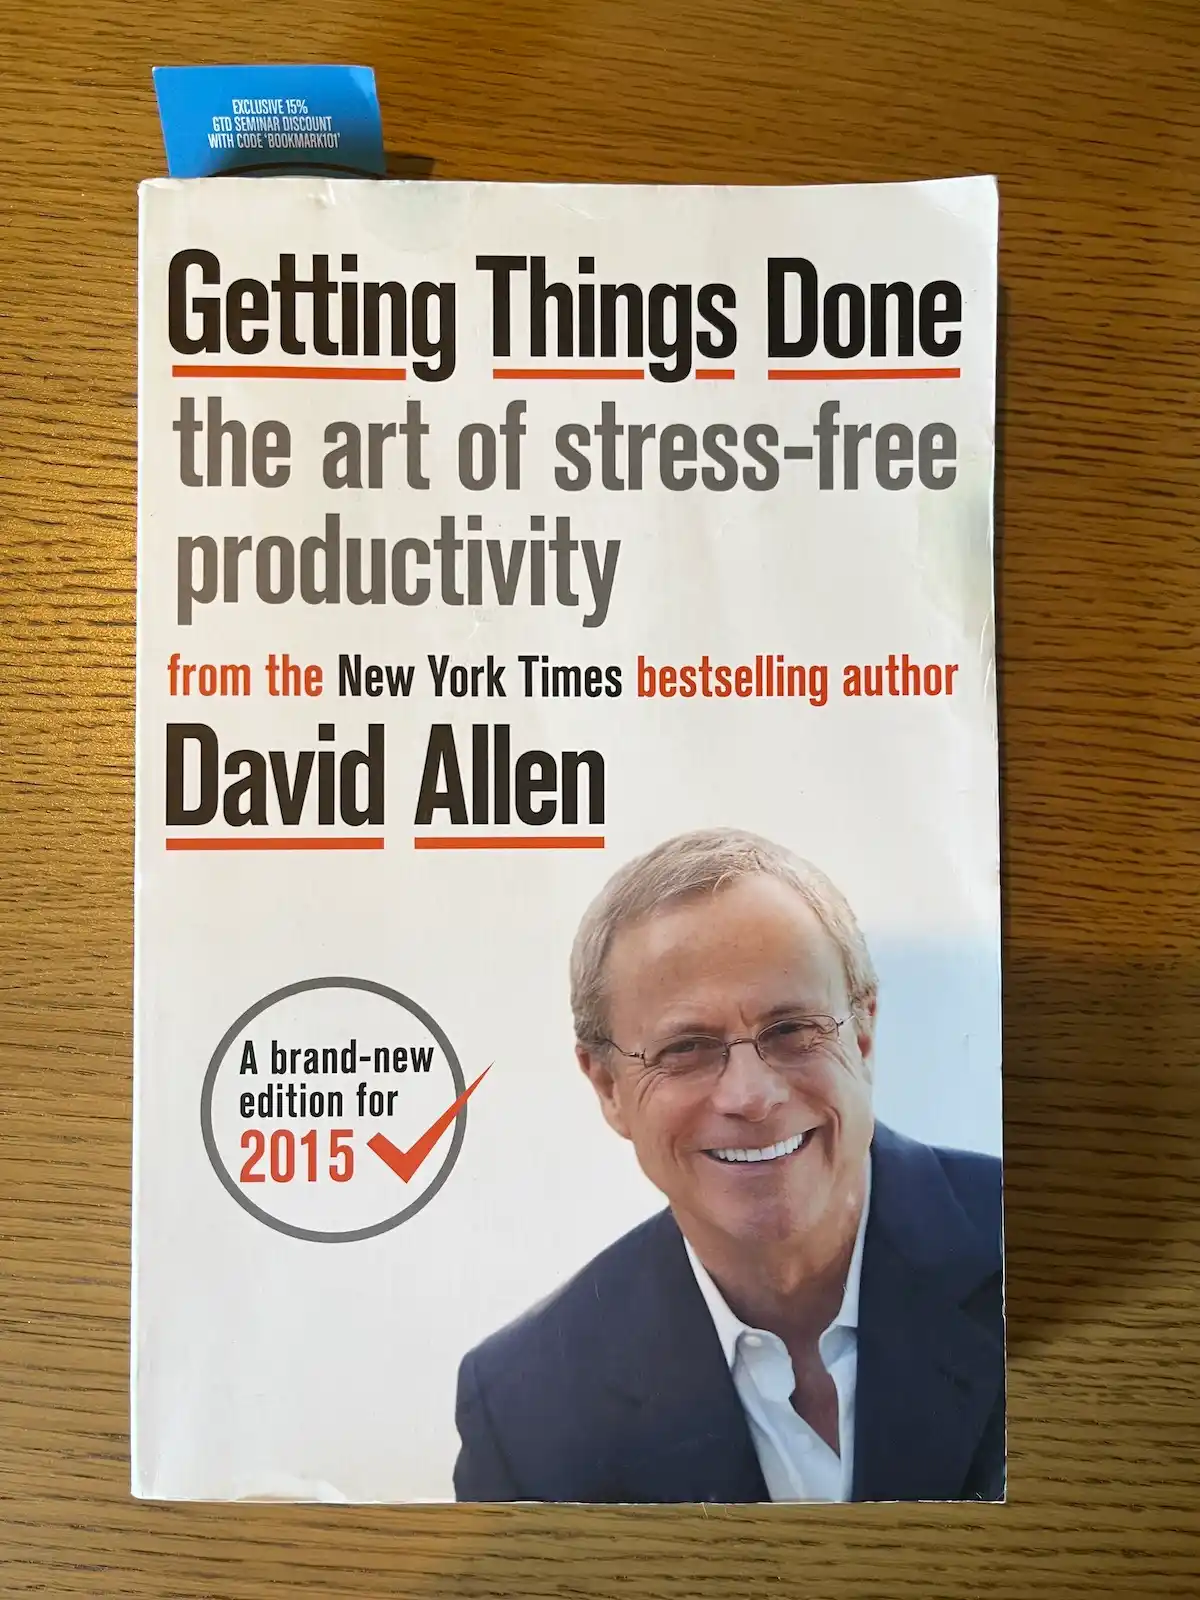 David Allen's Getting Things Done book on a wooden background.